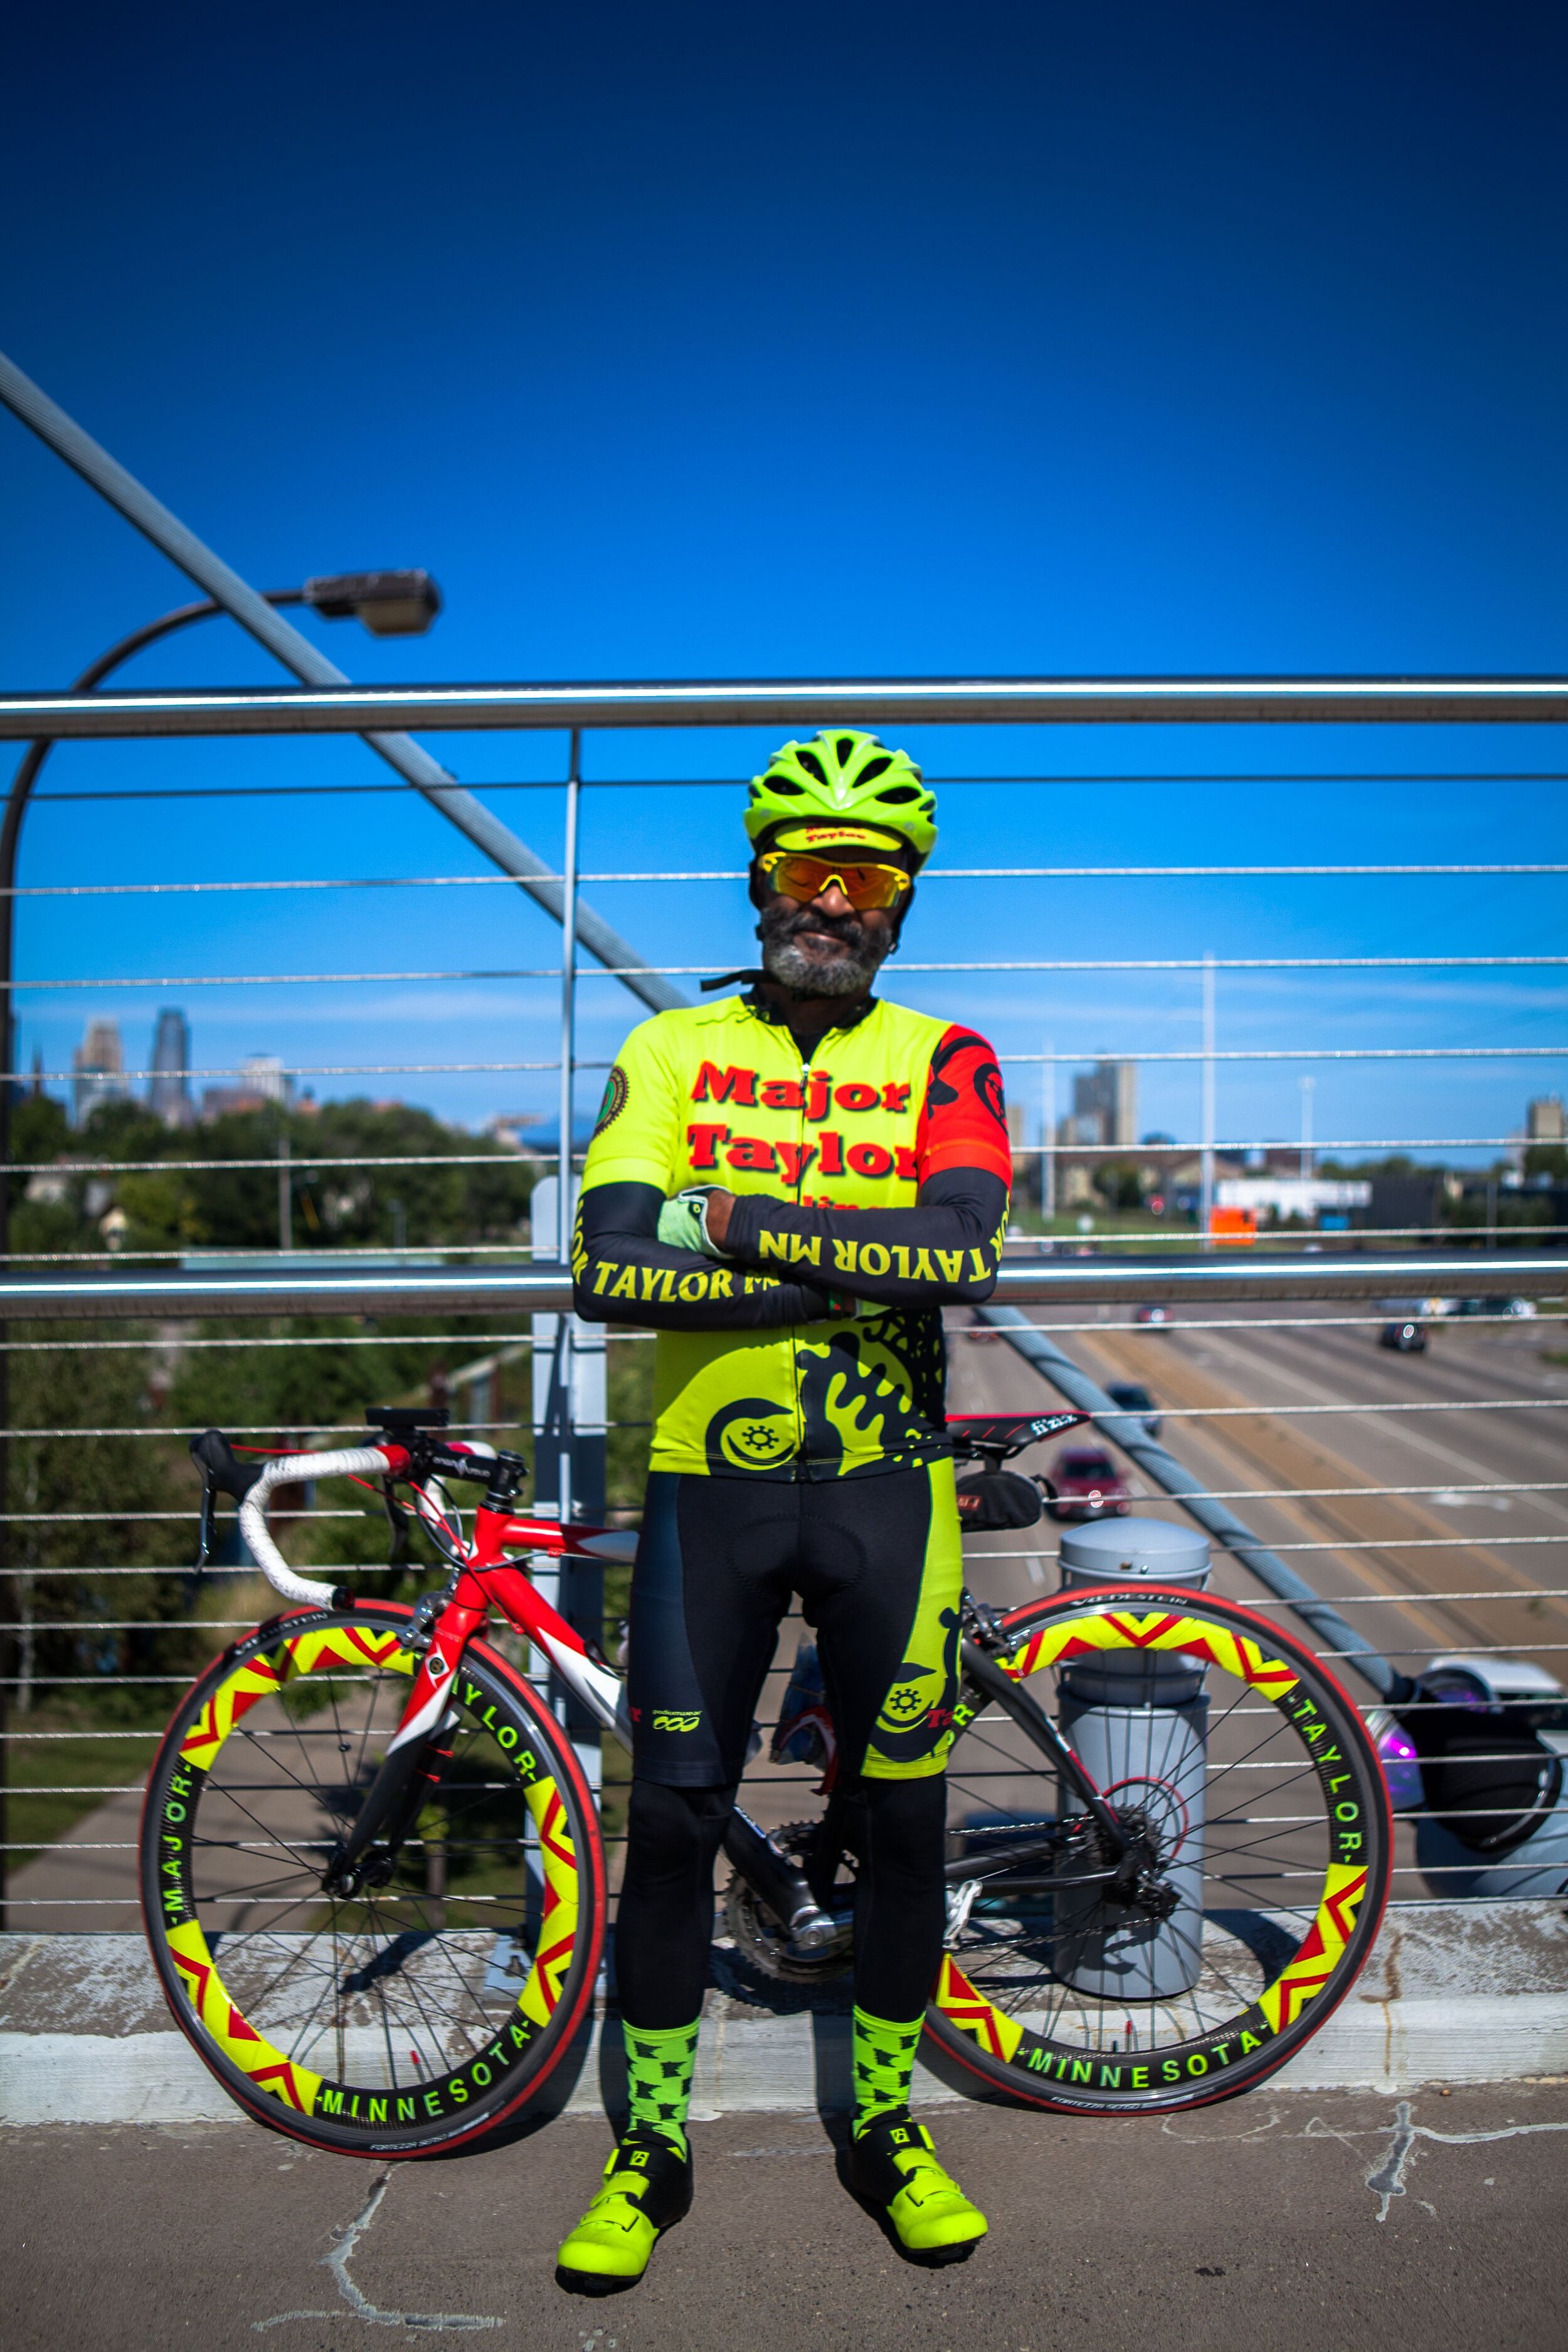  President of the Major Taylor Bicycling Club  of Minnesota, Louis has been cycling for over fifty years. He worked for nineteen years in the district office of Congressman Martin  Olav Sabo on transportation initiatives and  he has organized several